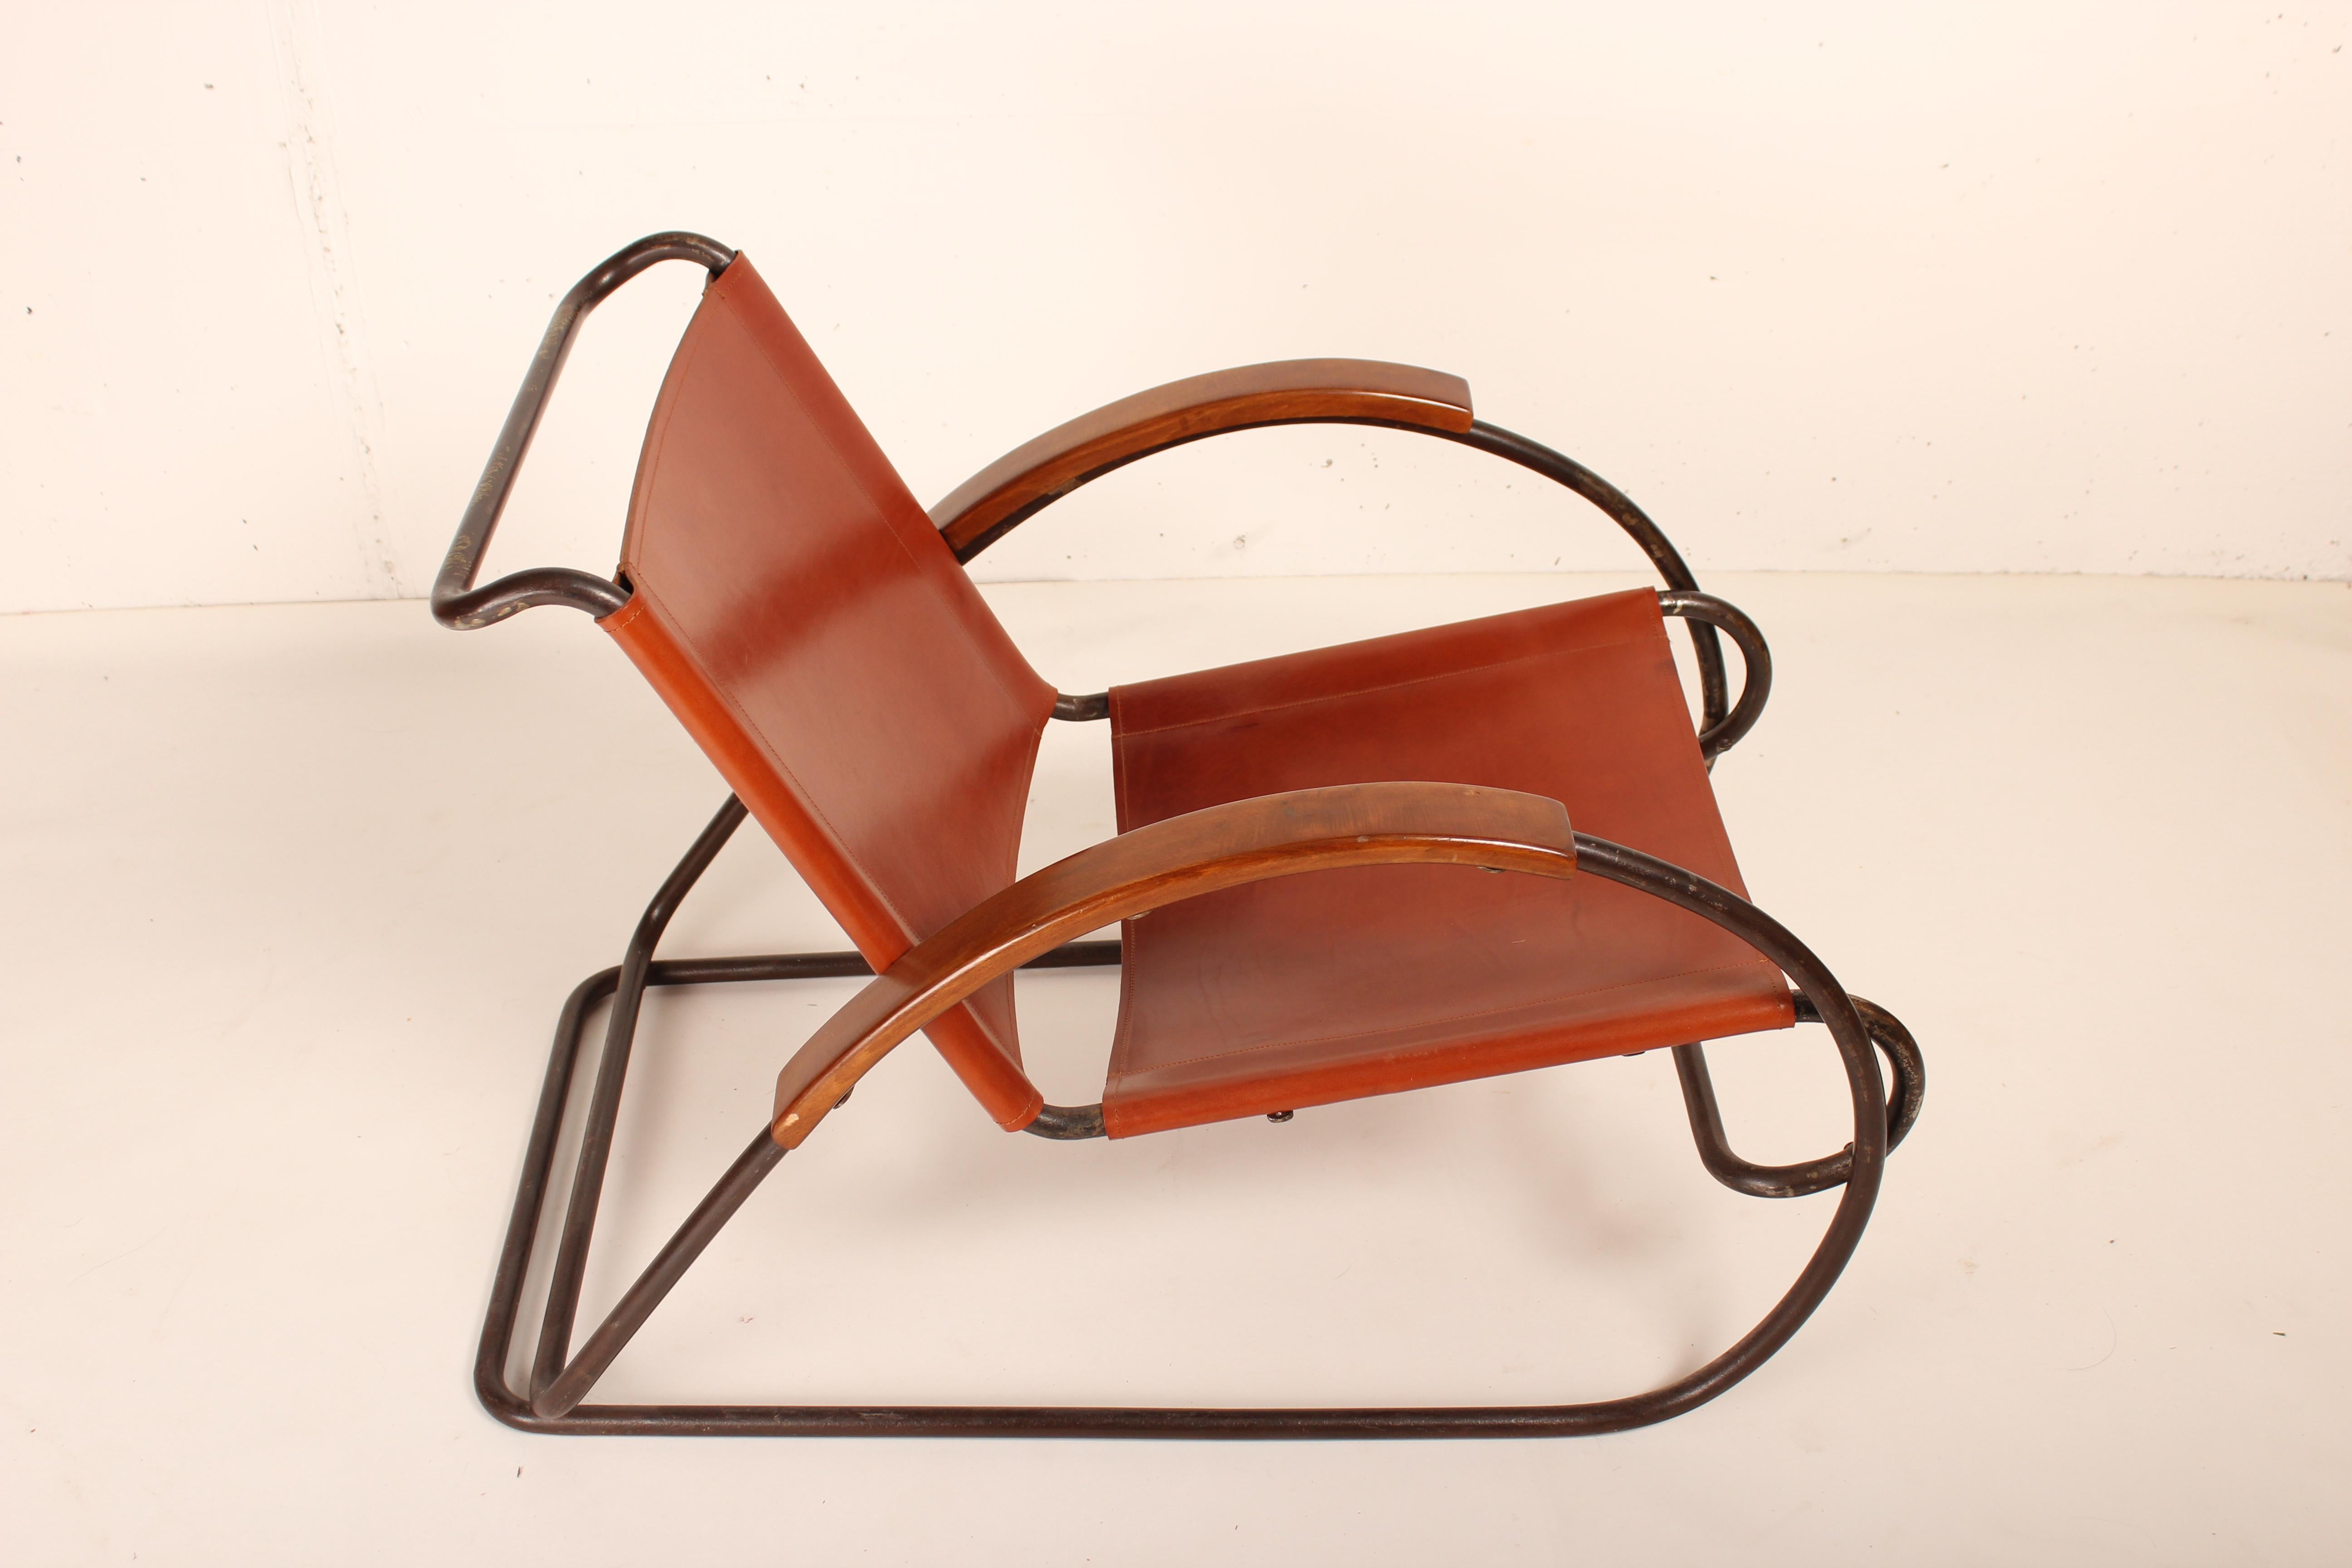 Rare Bauhaus armchair by Erich Dieckmann, Germany, 1931
Stunning sculptural lounge chair, tubular metal structure, arms with wood, seat and back restored in cognac leather, original Eisengarn in bad condition preserved for collectors.
Erich